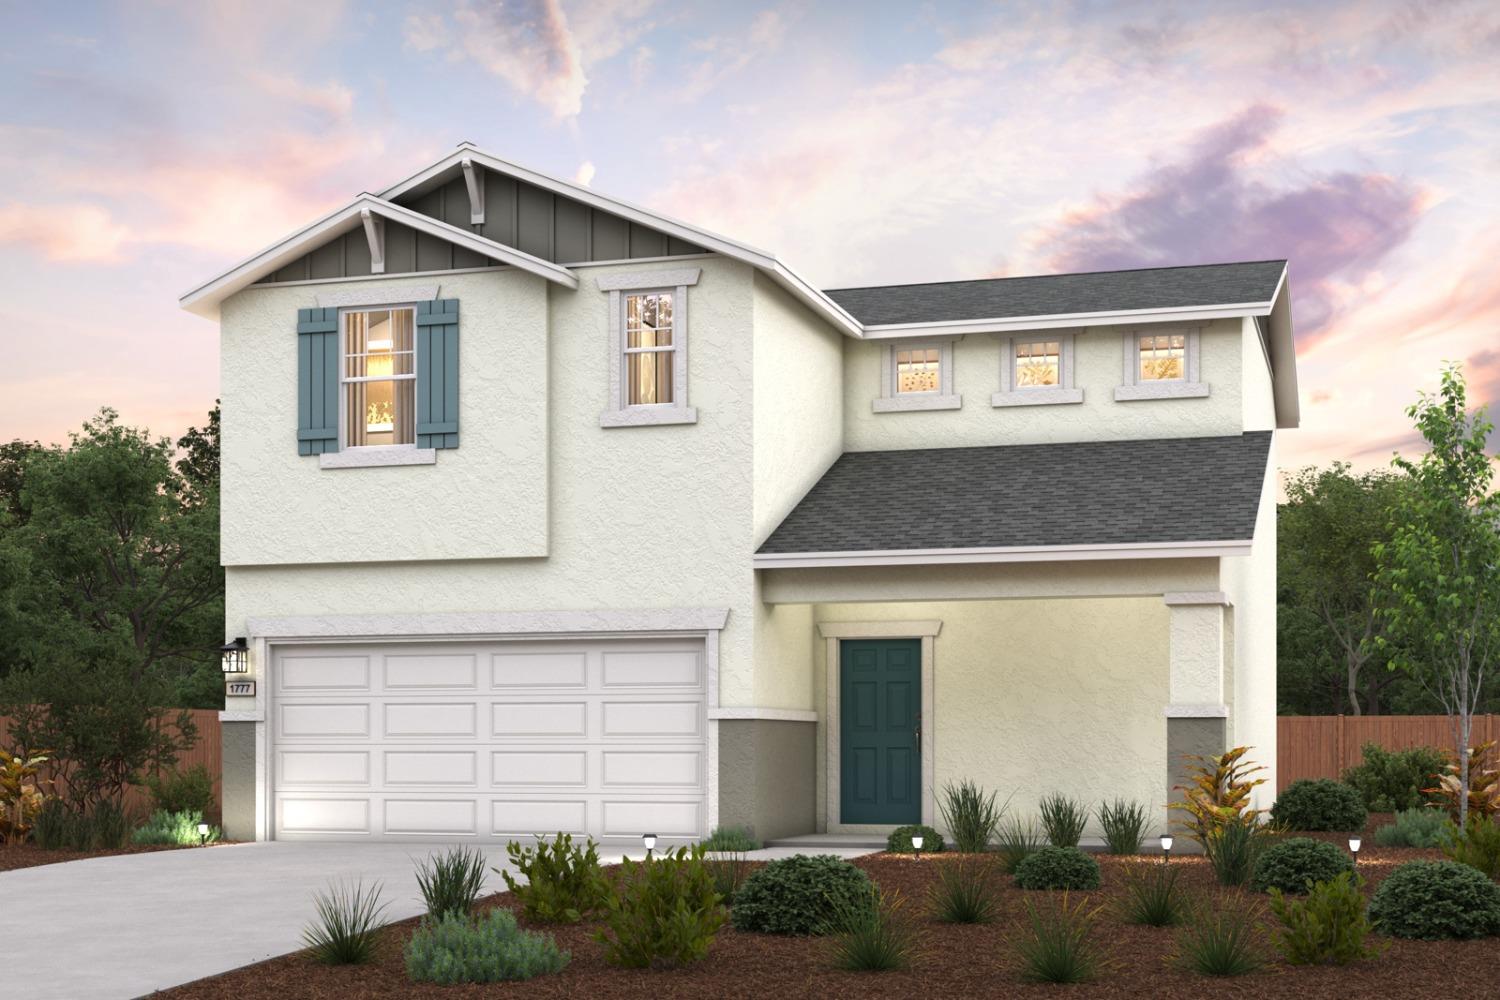 The Laurel at Crest View offers a balanced two-story layout. The main level showcases a unified dini